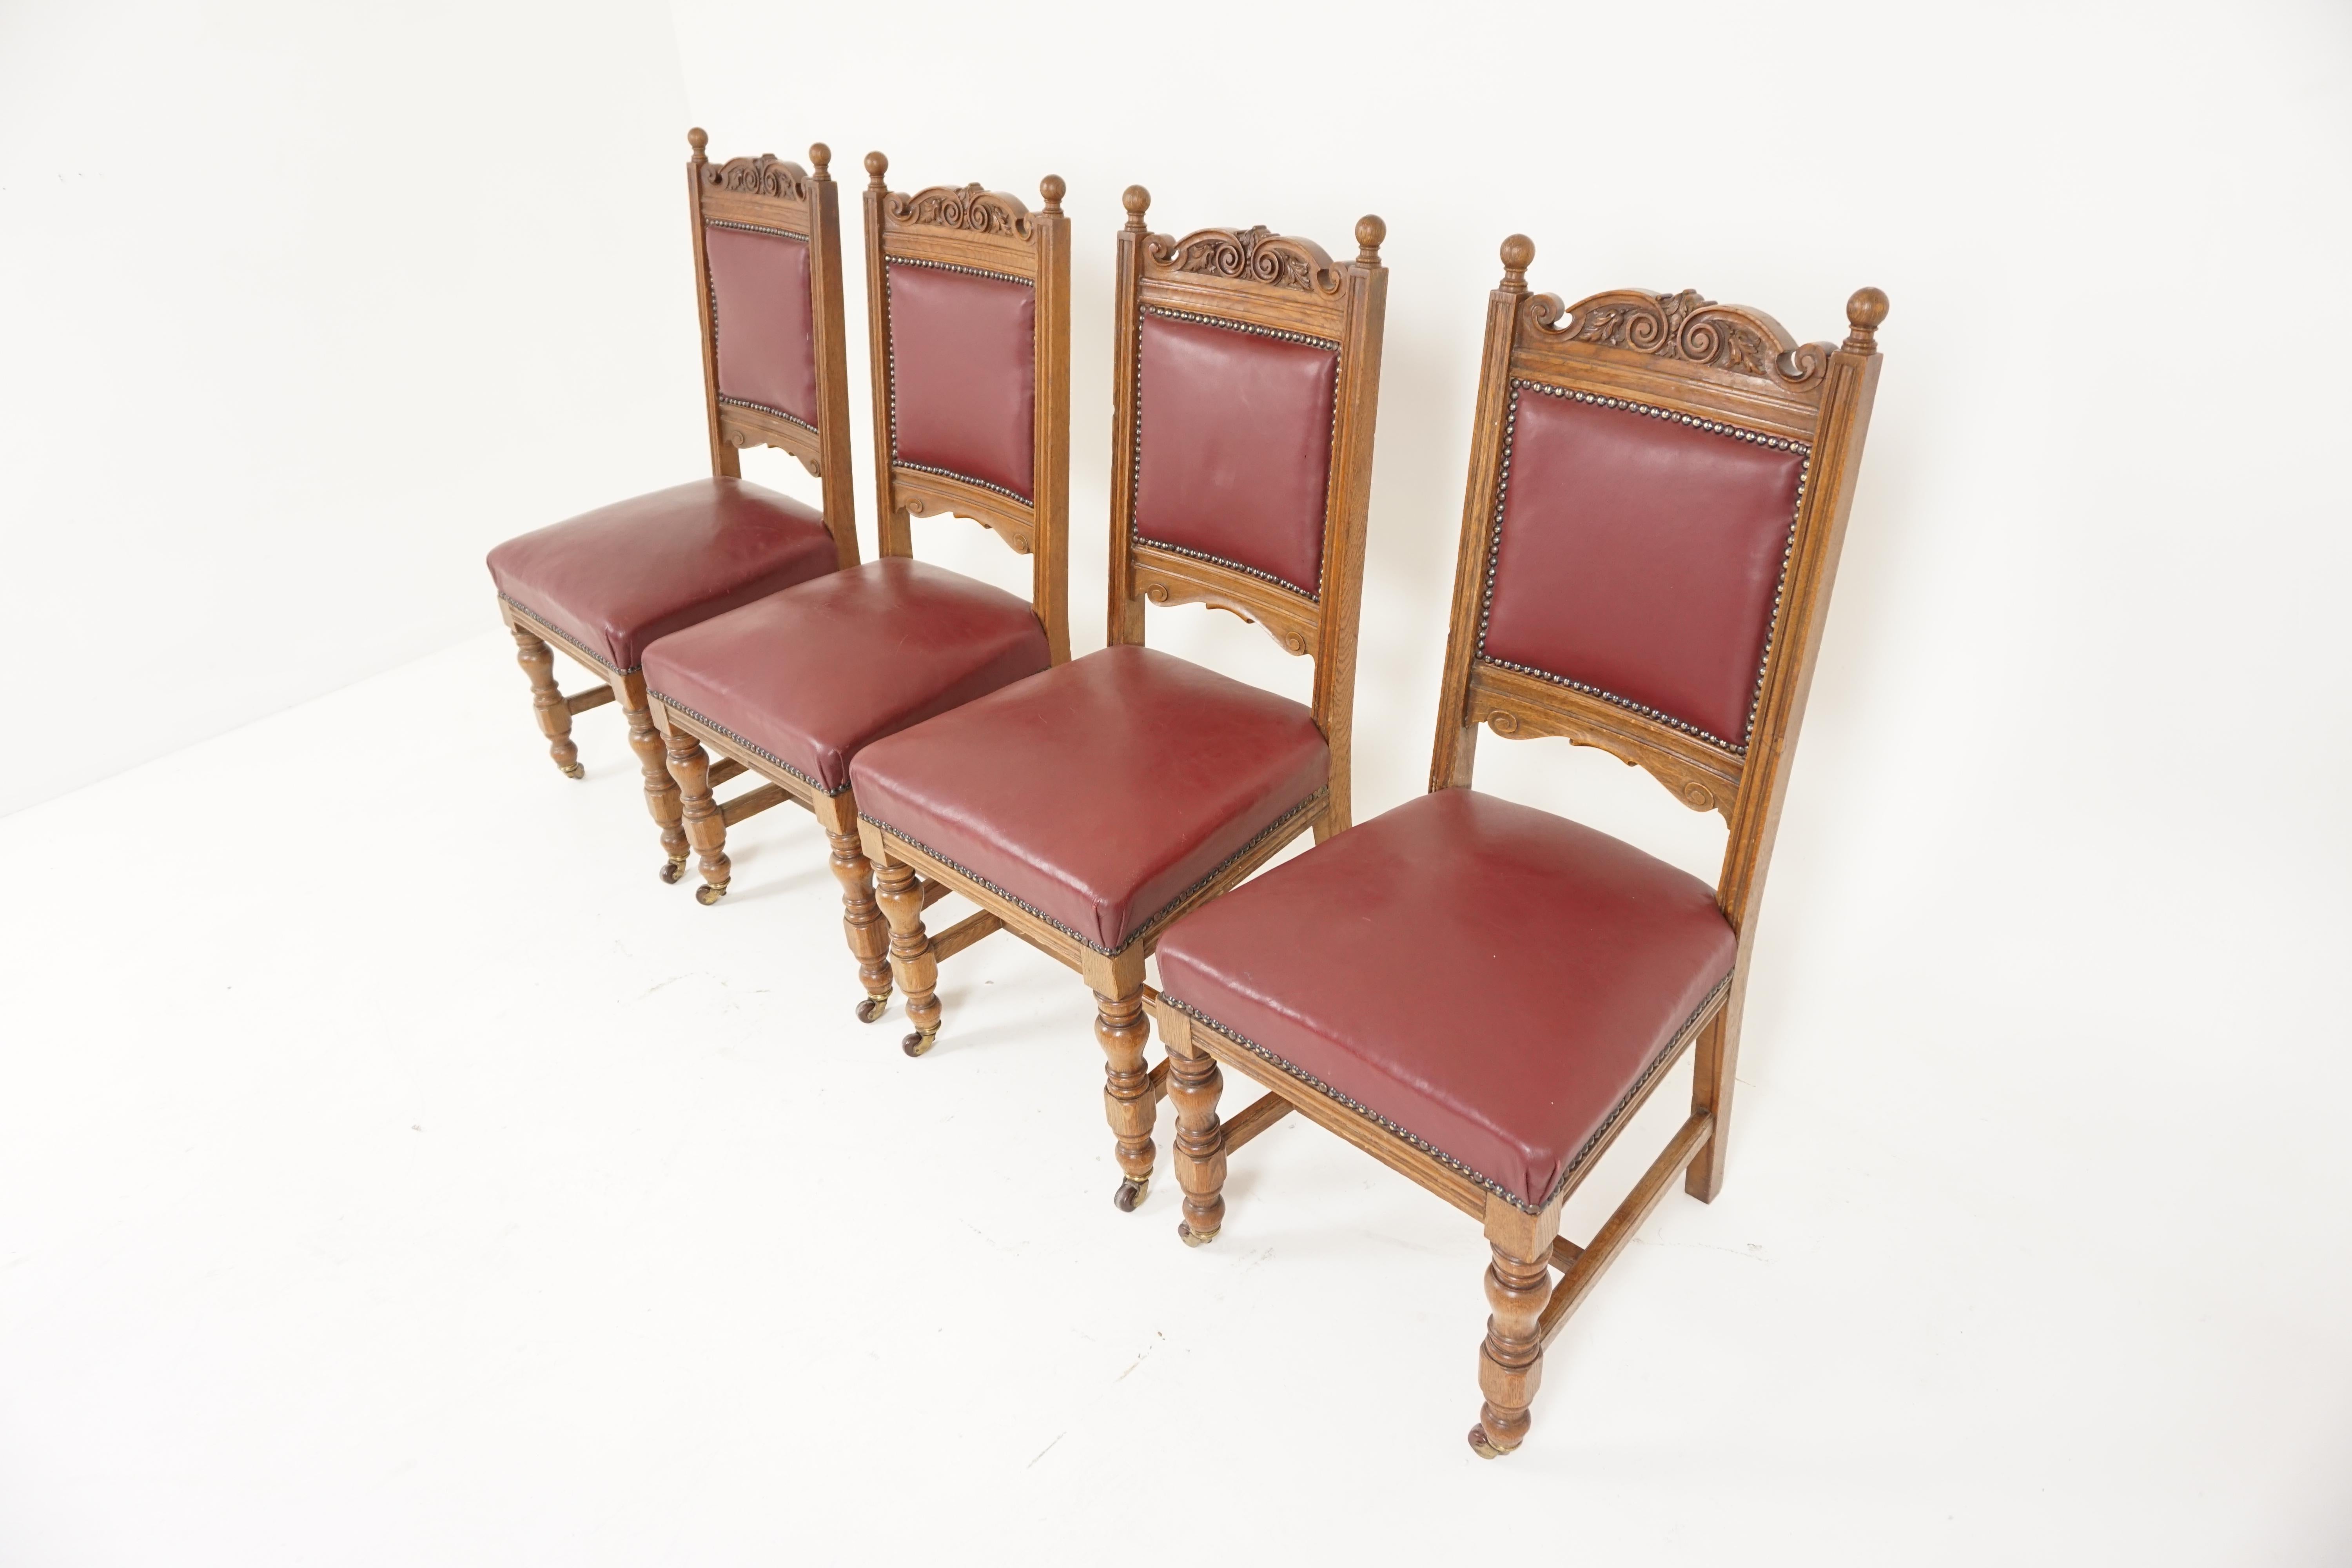 Set of four Victorian carved padded back oak dining chairs, Scotland, 1910

Scotland, 1910
Solid oak
Original finish
Carved top rail with finials on the ends
Padded back in an oak frame
Large stuffed over leather seat
The front and side